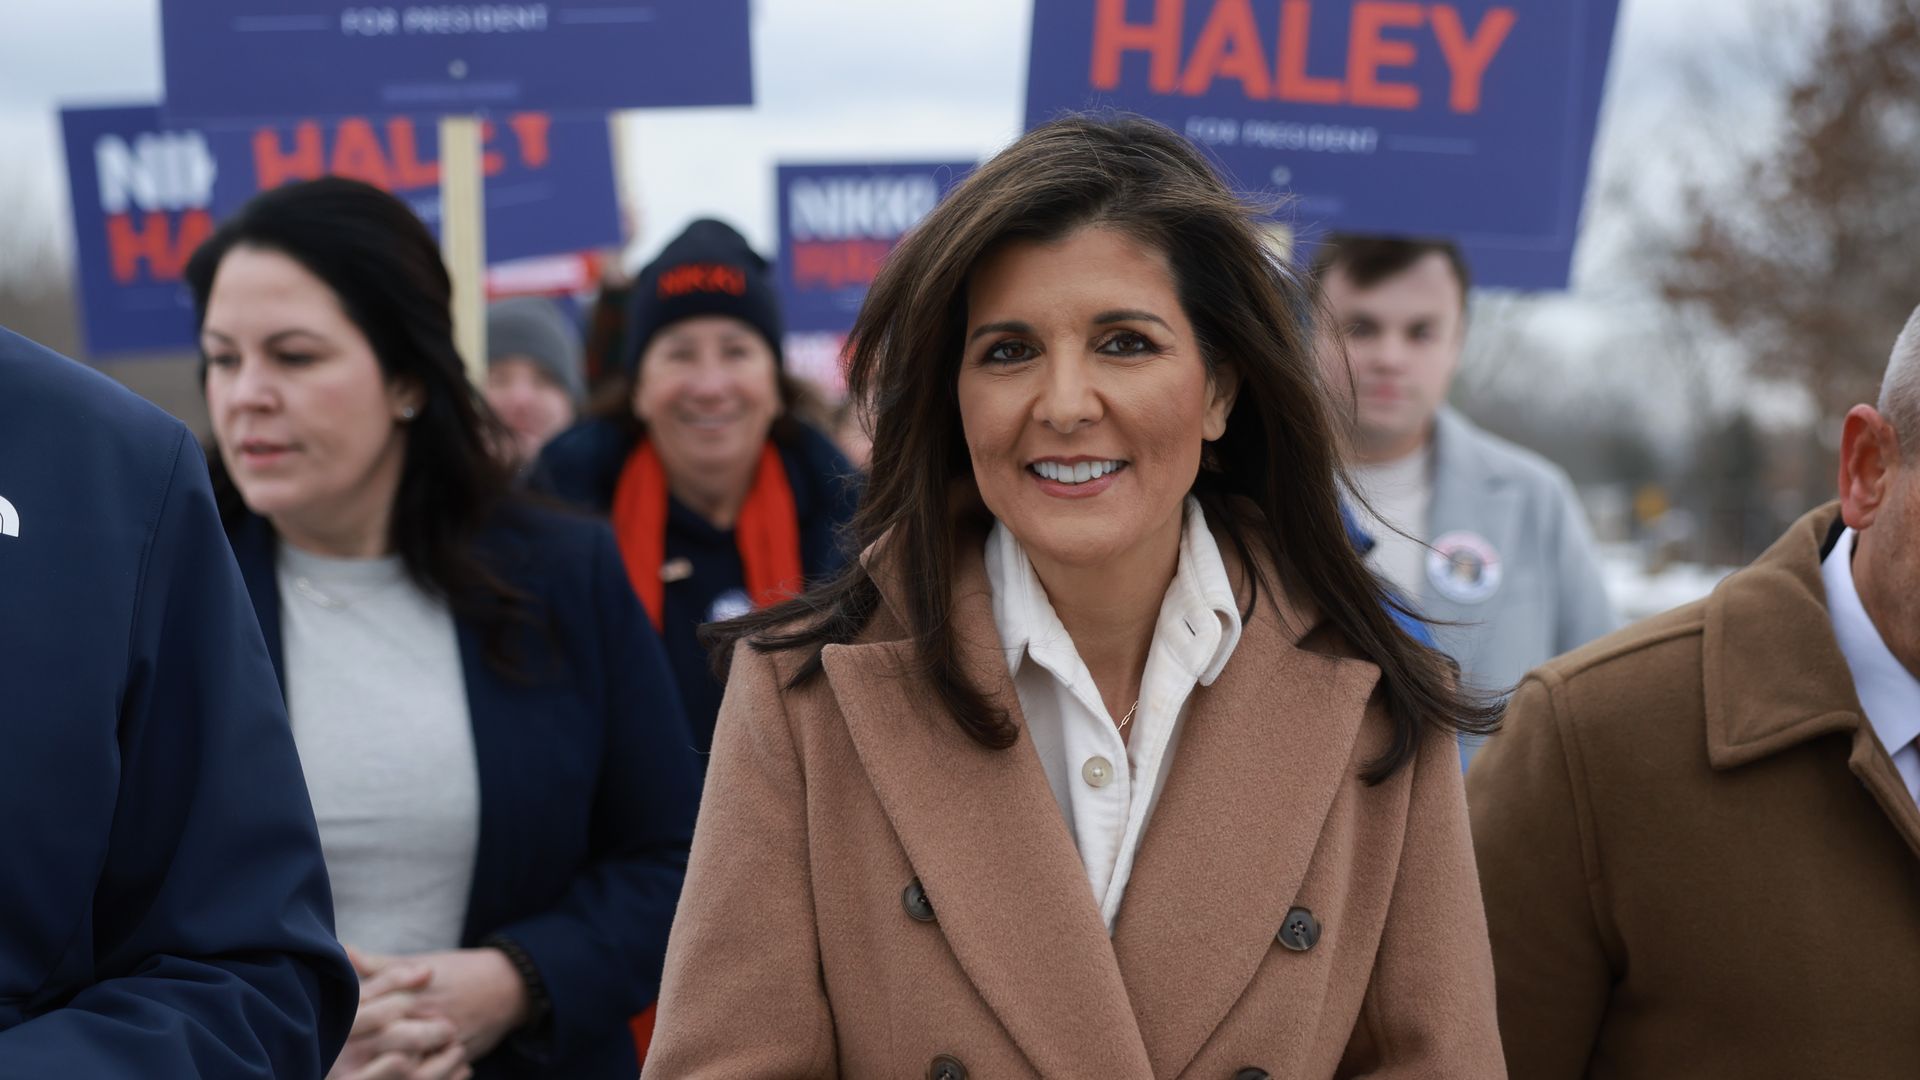 Nikki Haley wearing a blue coat walks with people holding signs in her support 